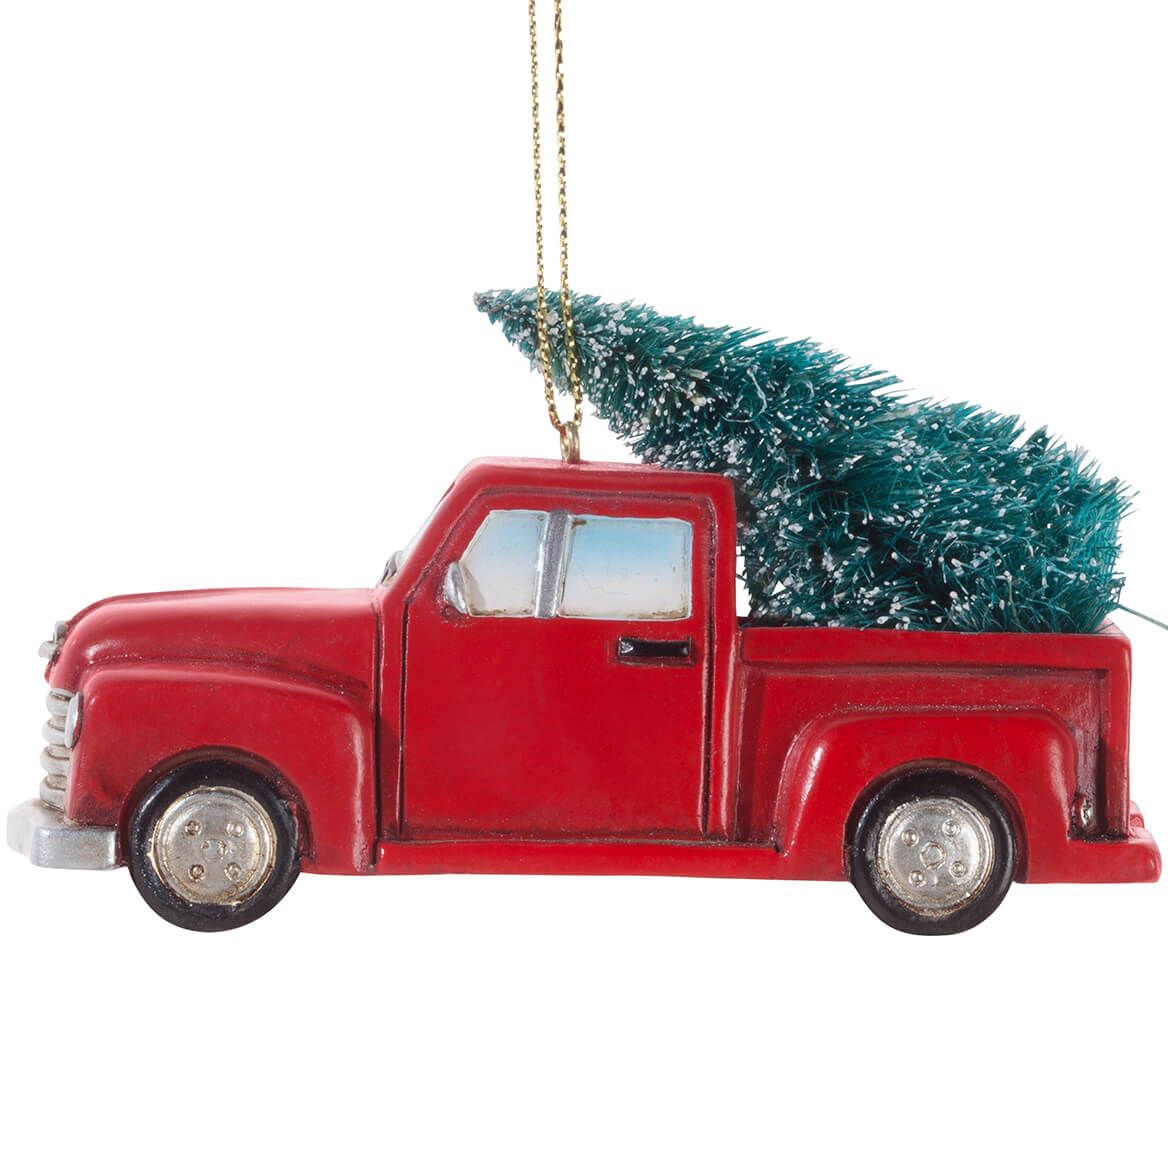 Red Truck with Tree Ornament + '-' + 356445